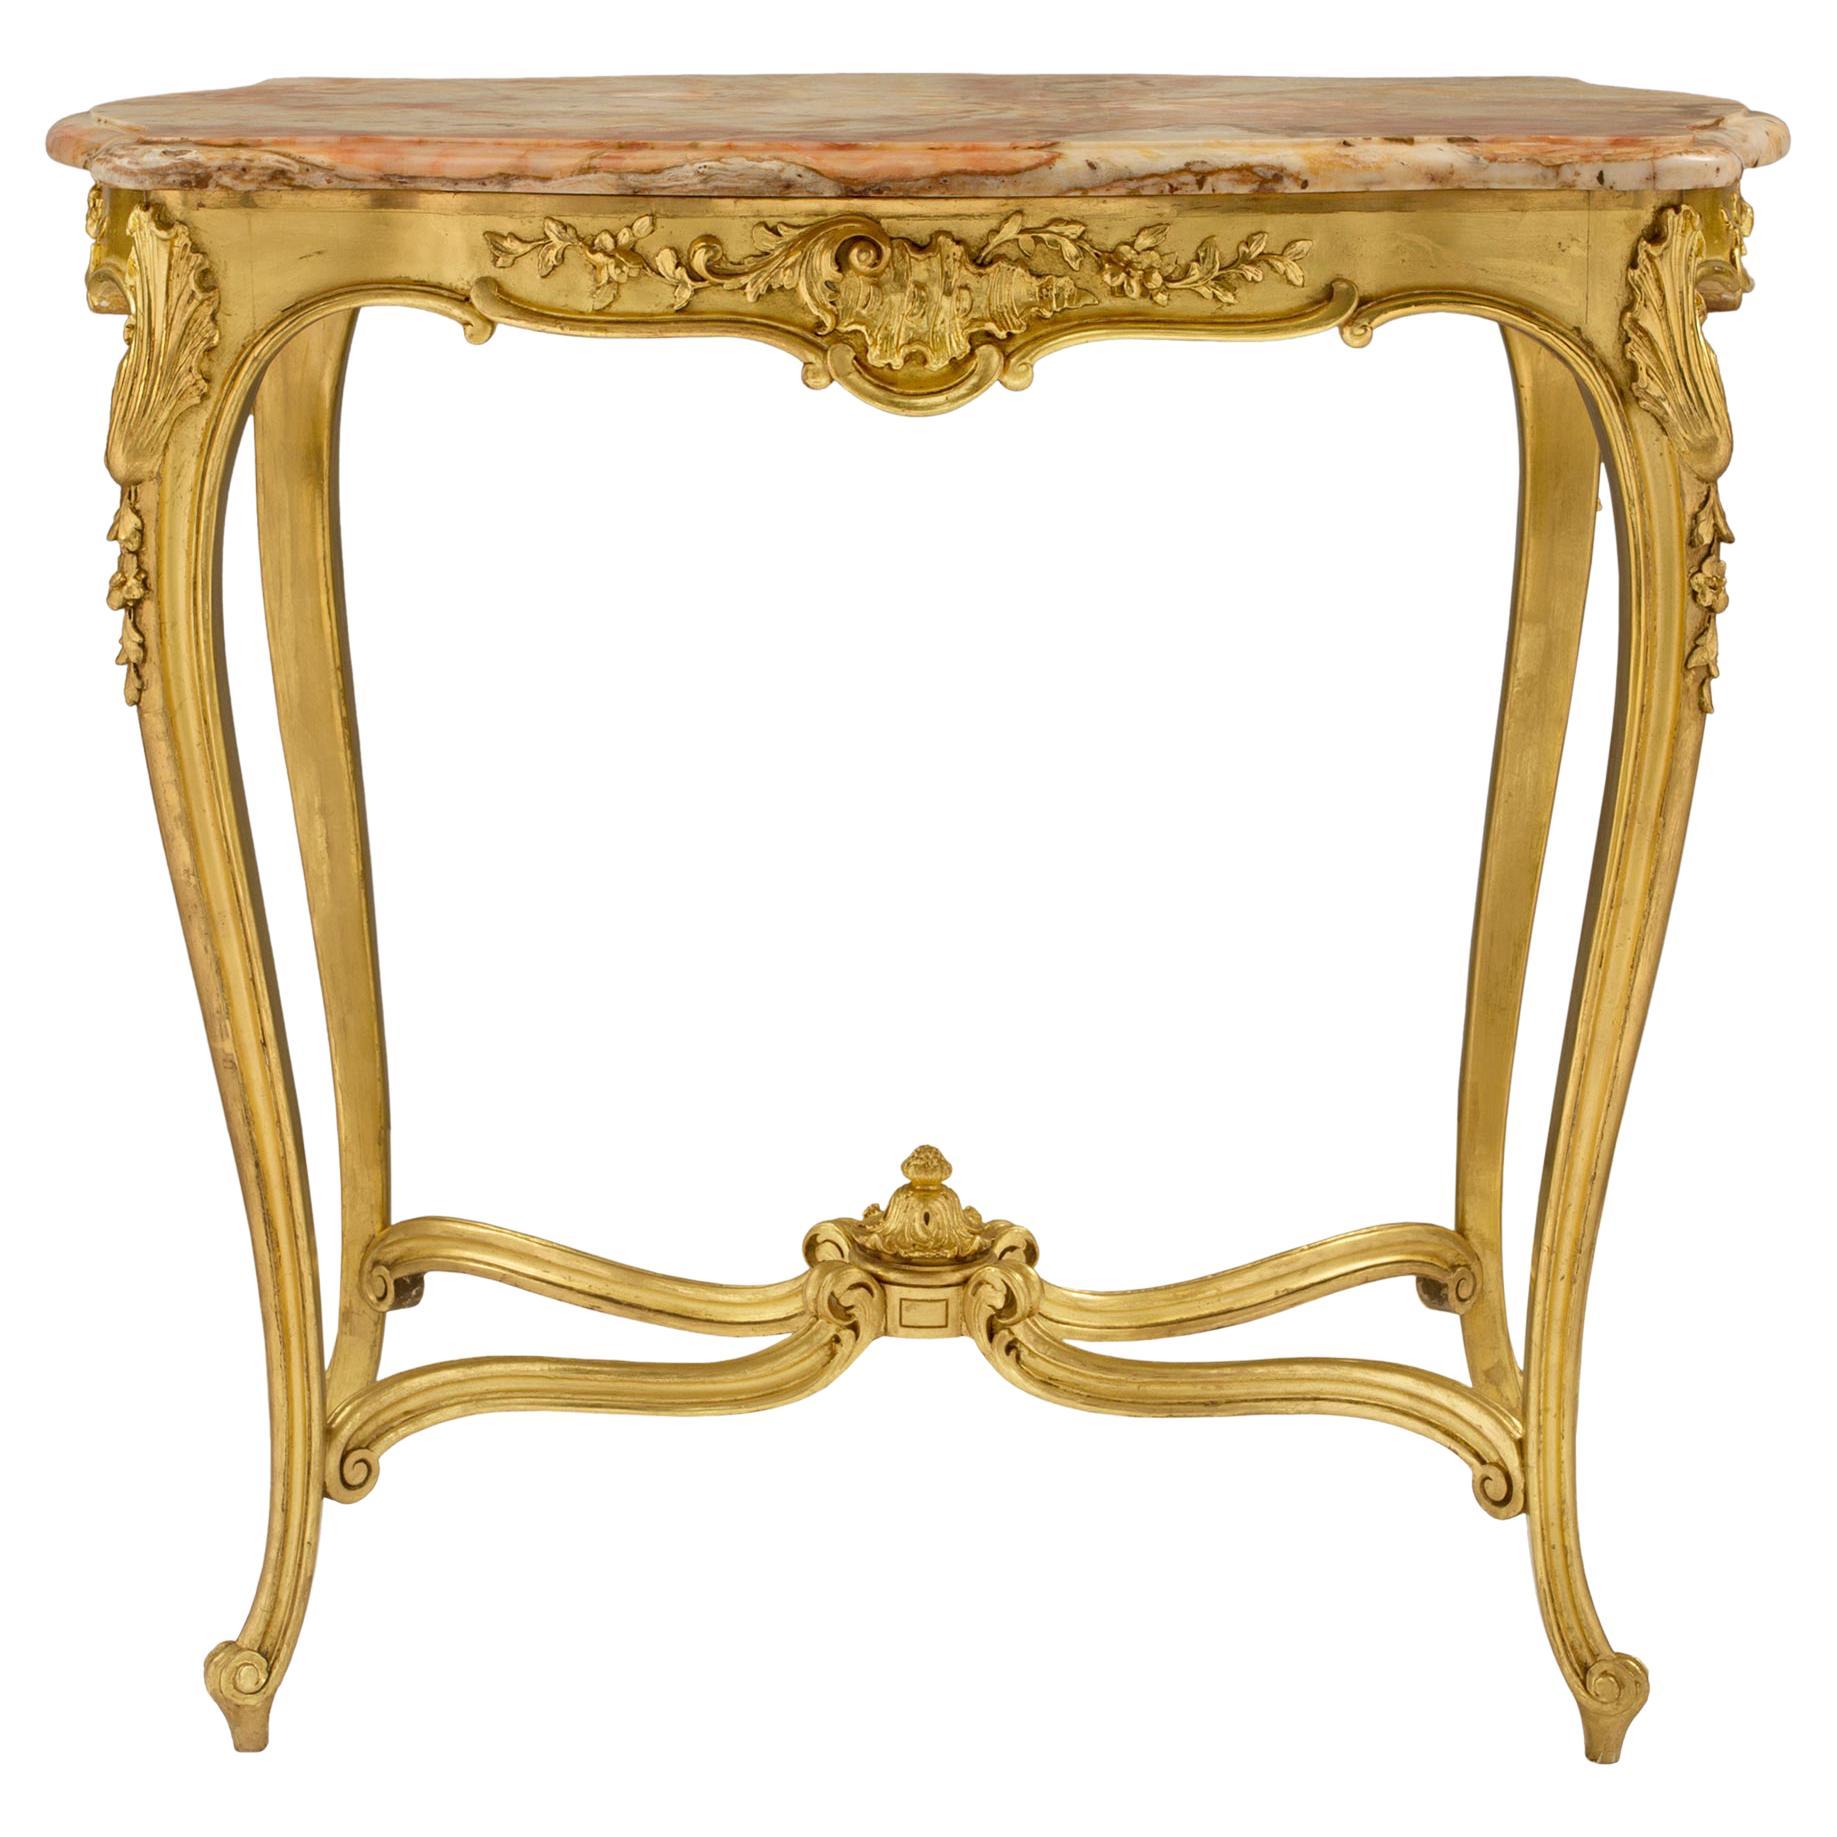 French 19th Century Louis XV Style Giltwood and Marble Side/Center Table